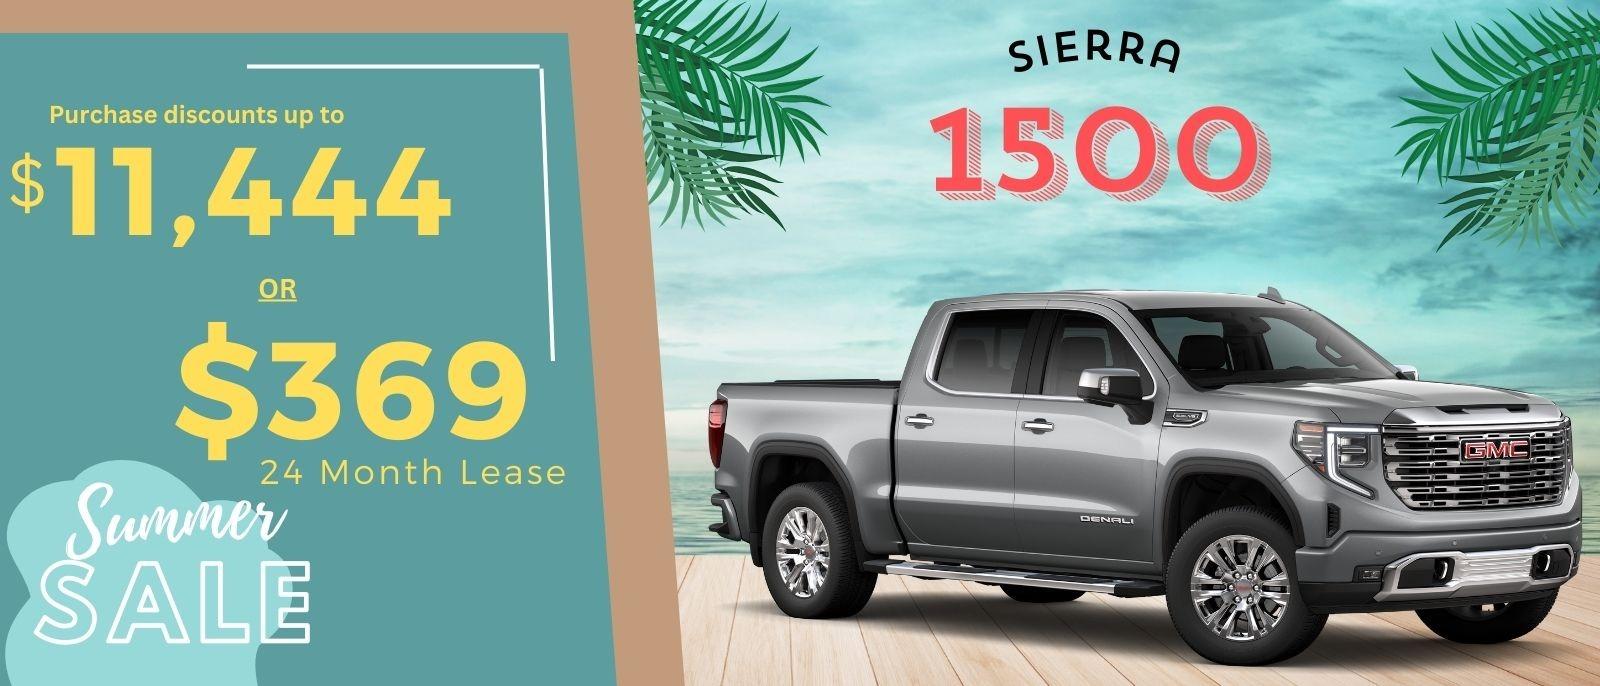 GMC Sierra 1500 Discounts And Lease offers